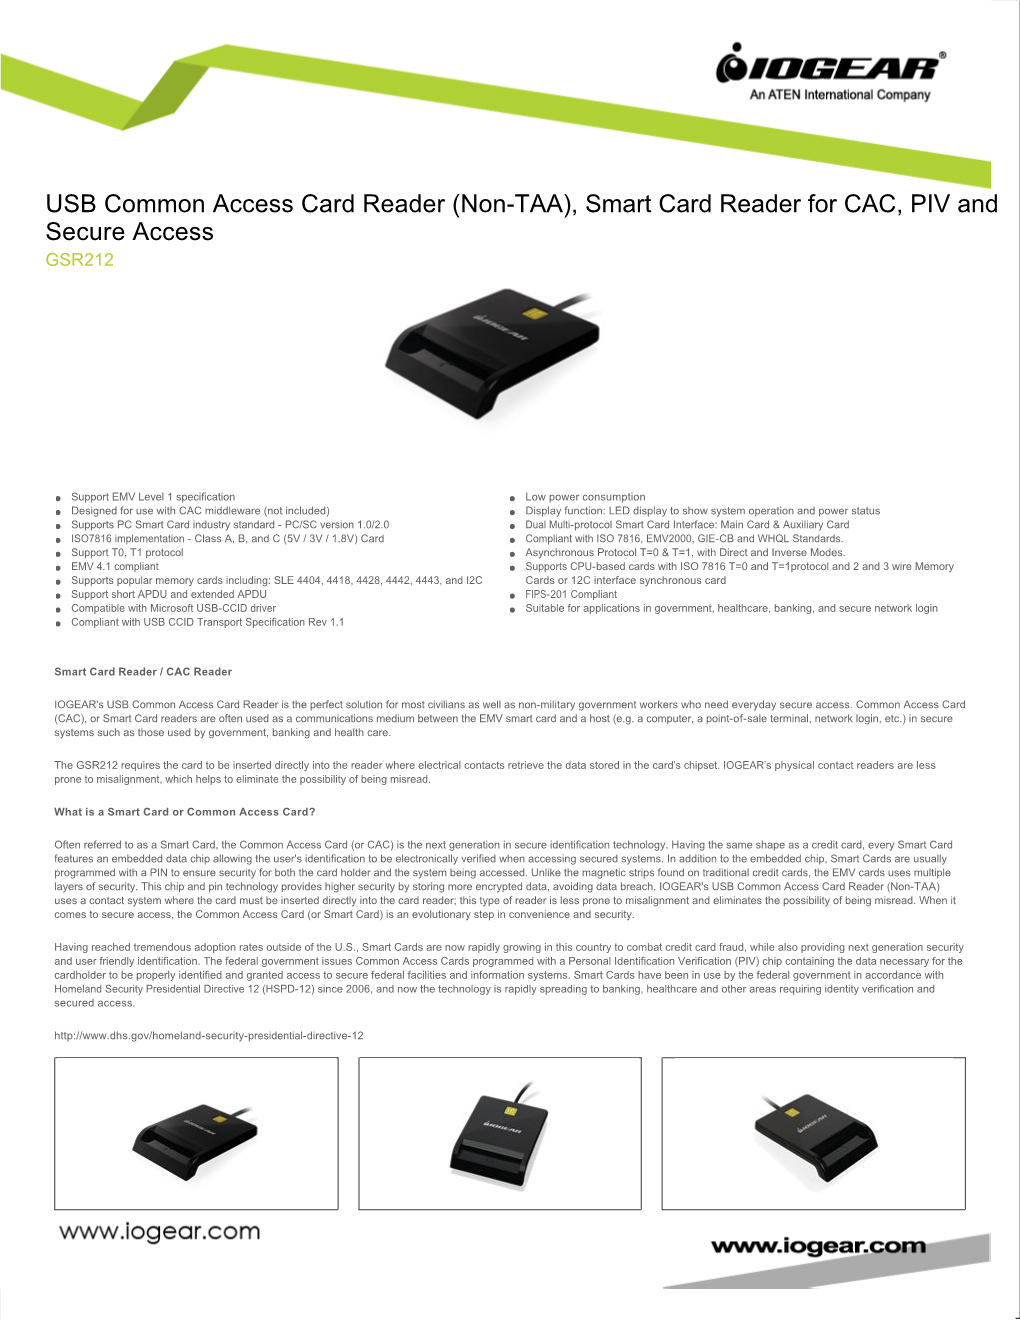 (Non-TAA), Smart Card Reader for CAC, PIV and Secure Access GSR212